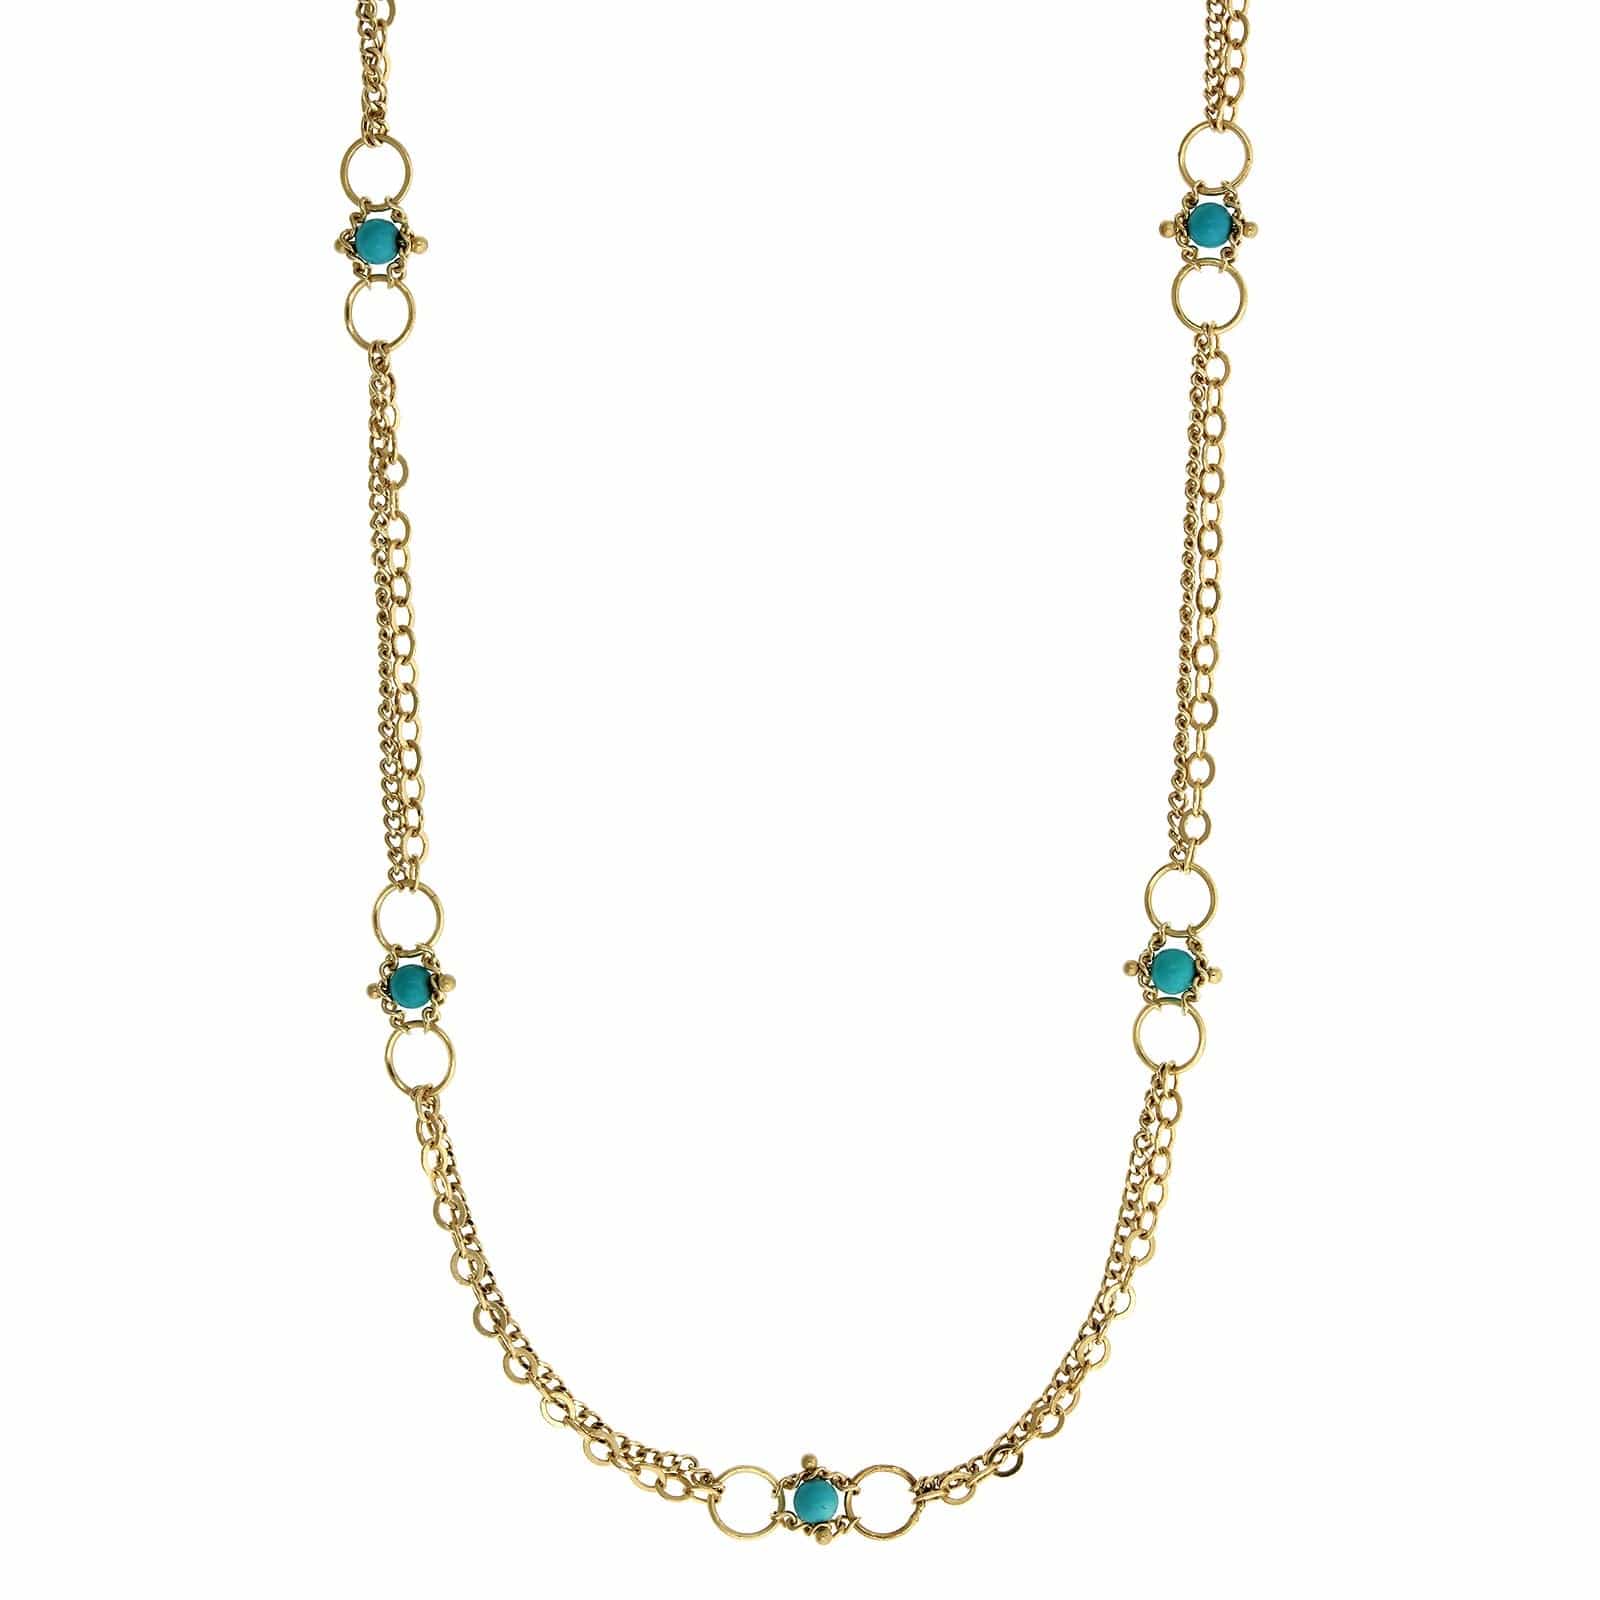 18K Yellow Gold Turquoise Bead Necklace, Long's Jewelers